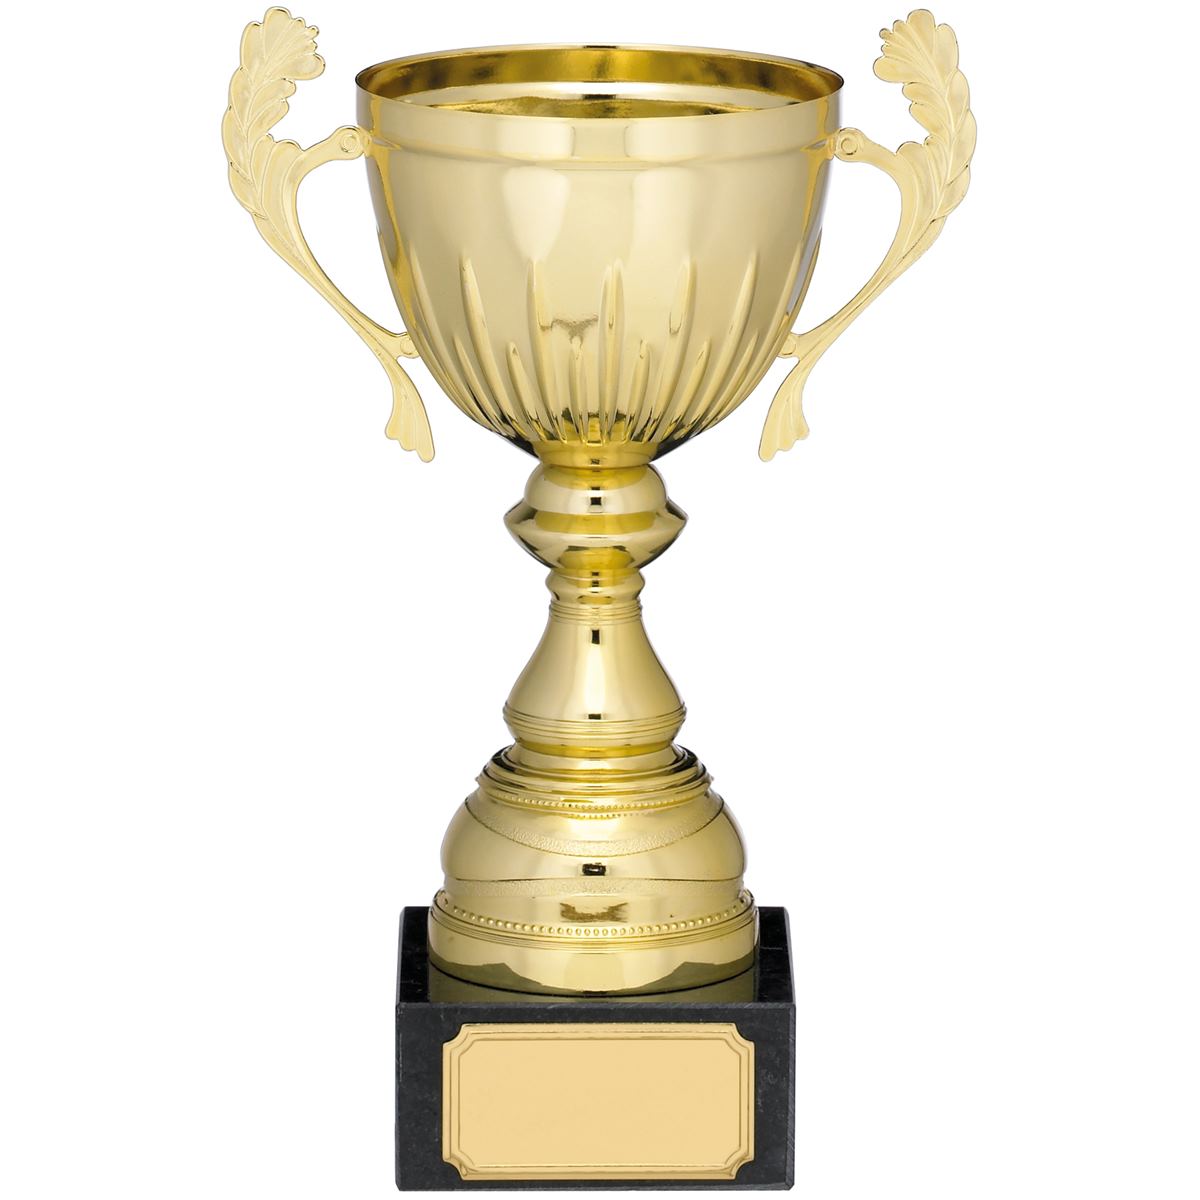 Gold Trophy Cup with Handles - A Size